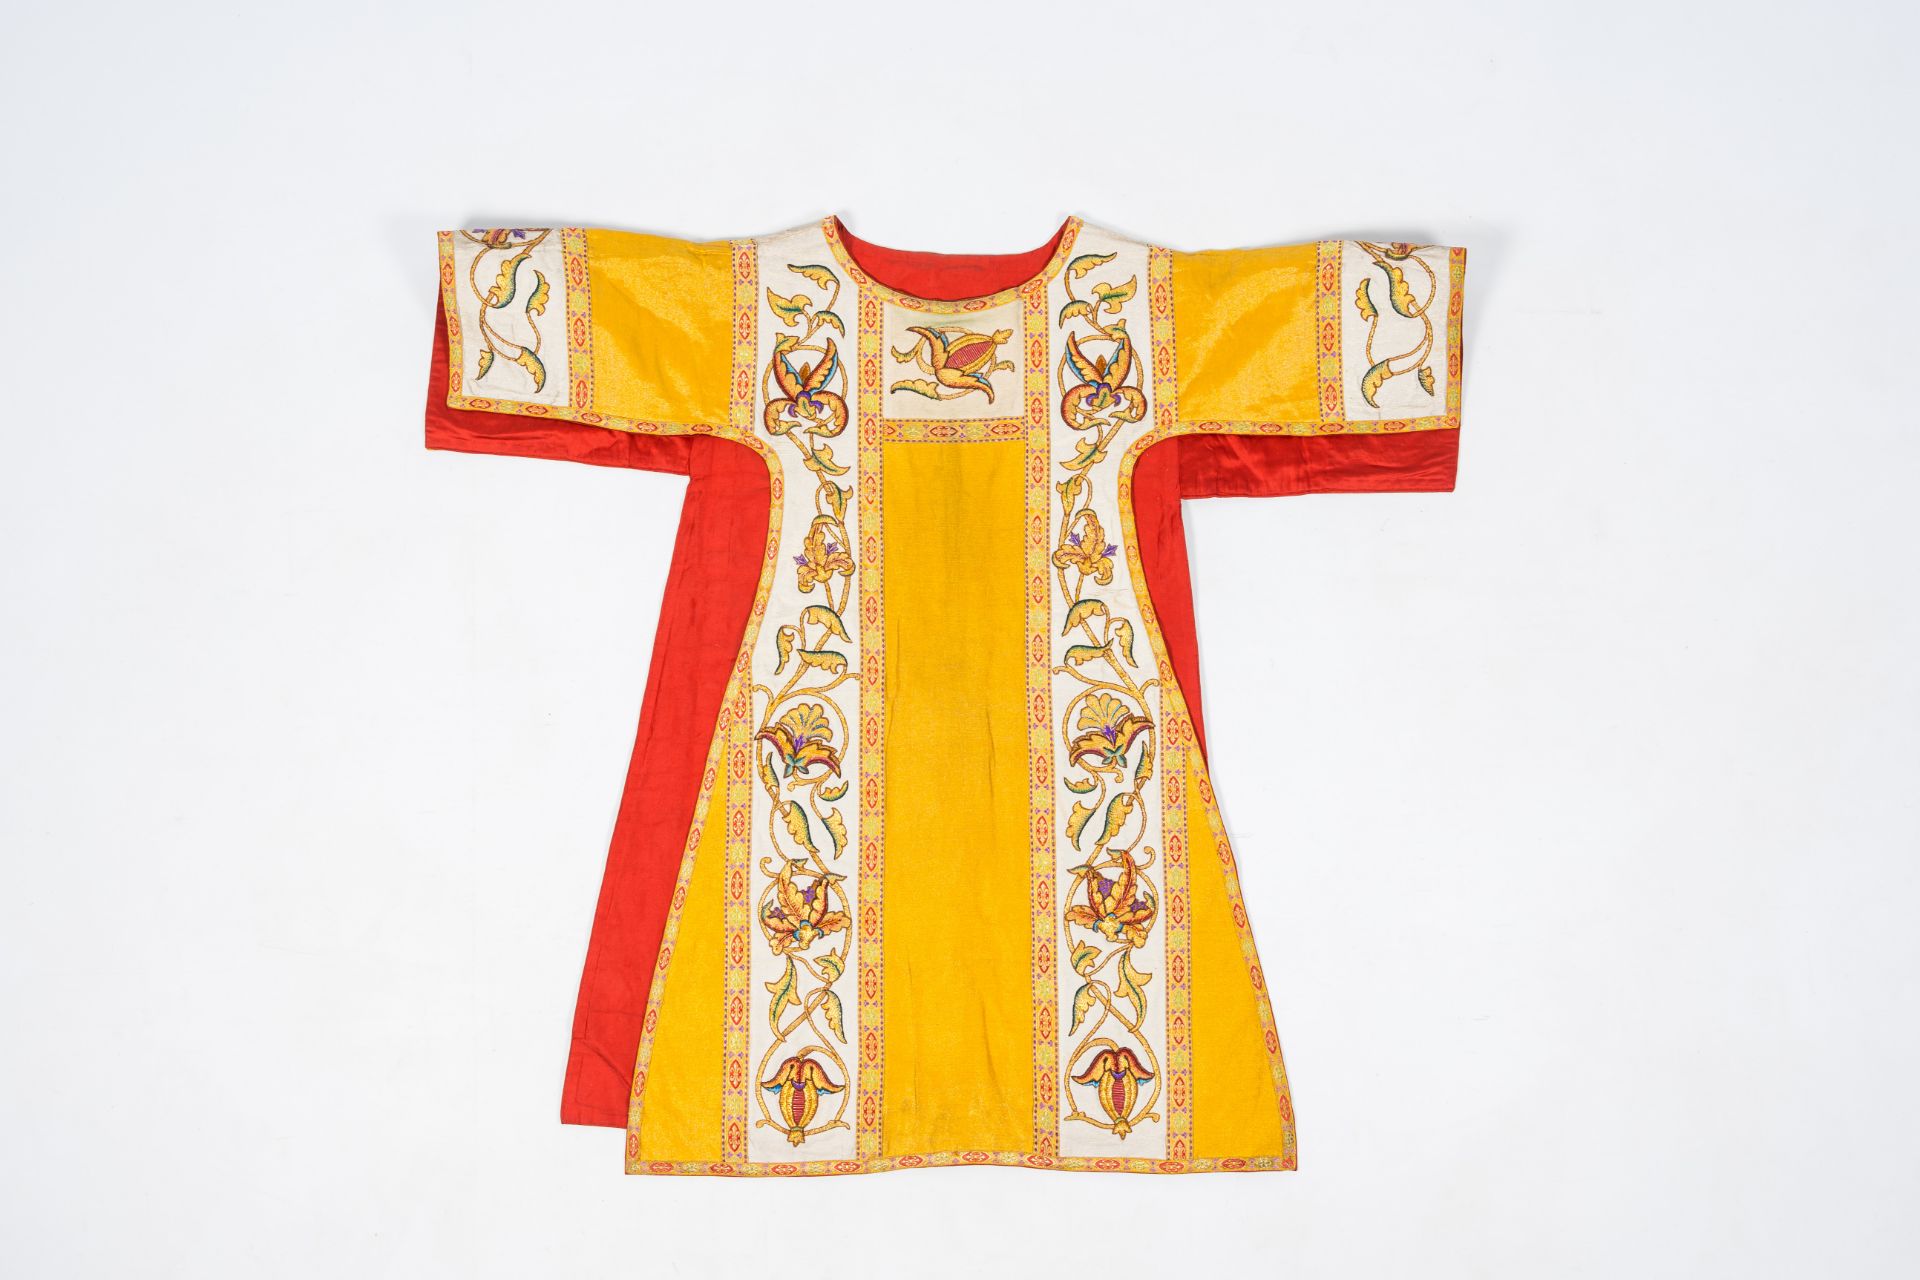 A Gothic Revival gold and silver thread dalmatic with embroidered floral design, 20th C.